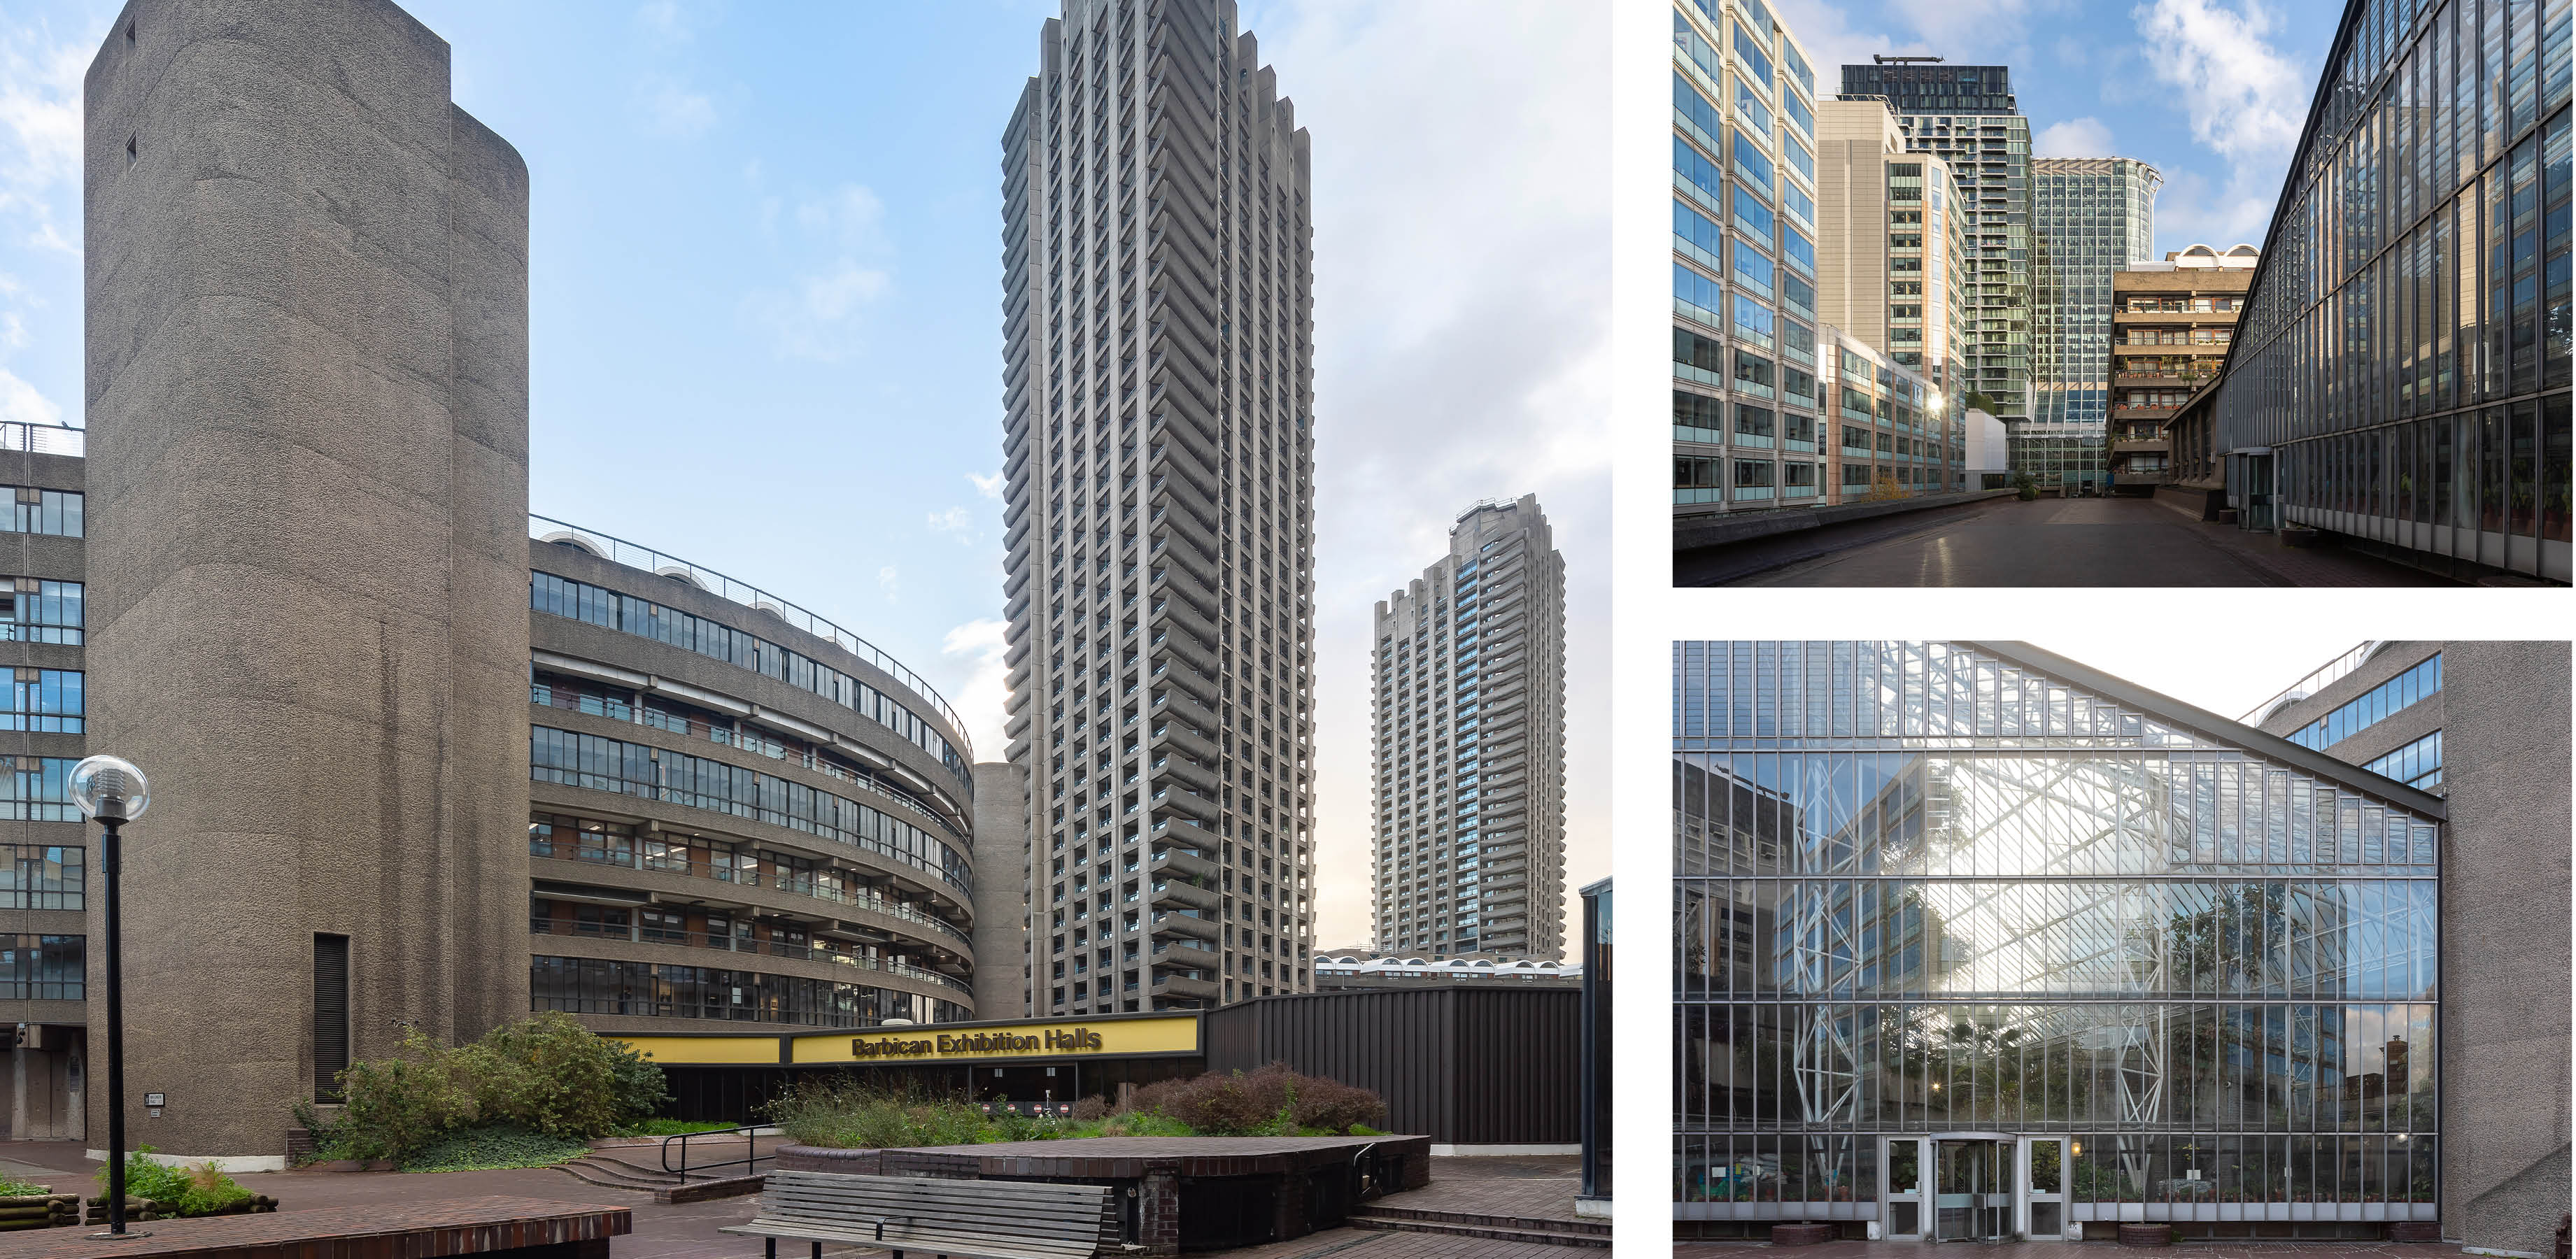 Collage of photos of glass and concrete buildings